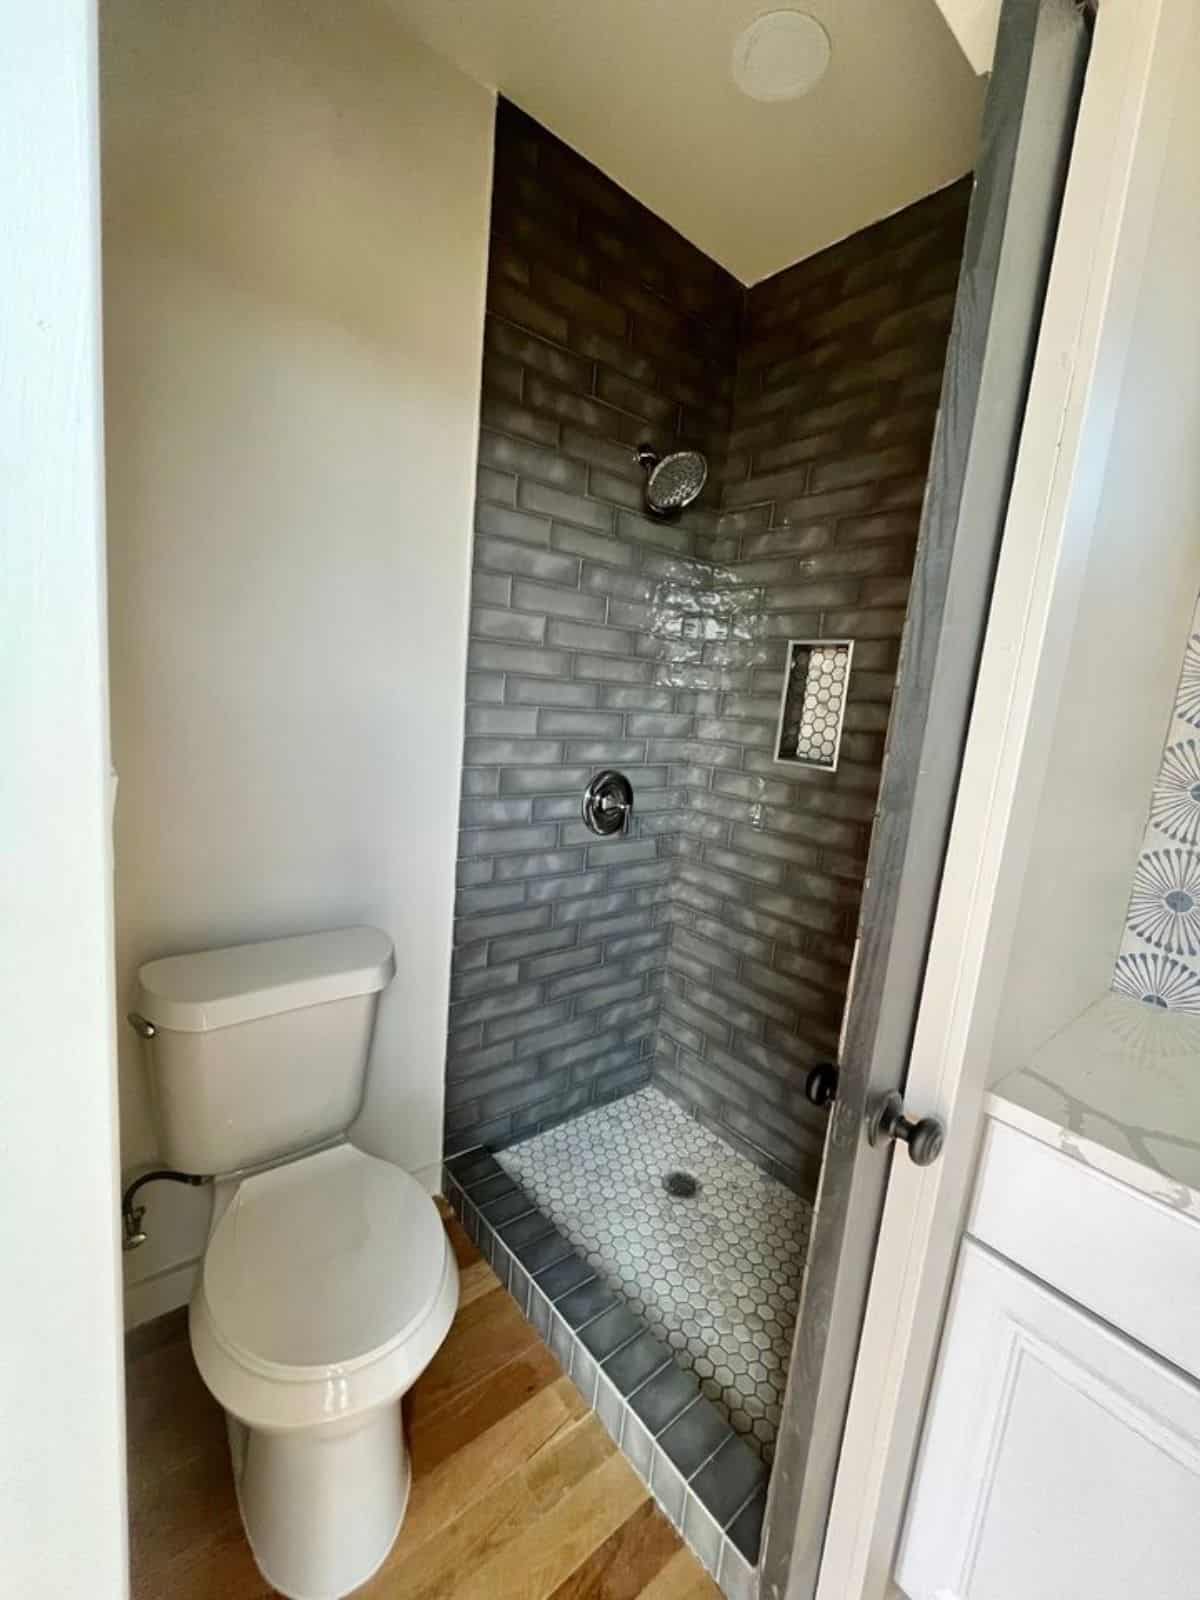 bathroom of tiny studio house has all the standard fittings